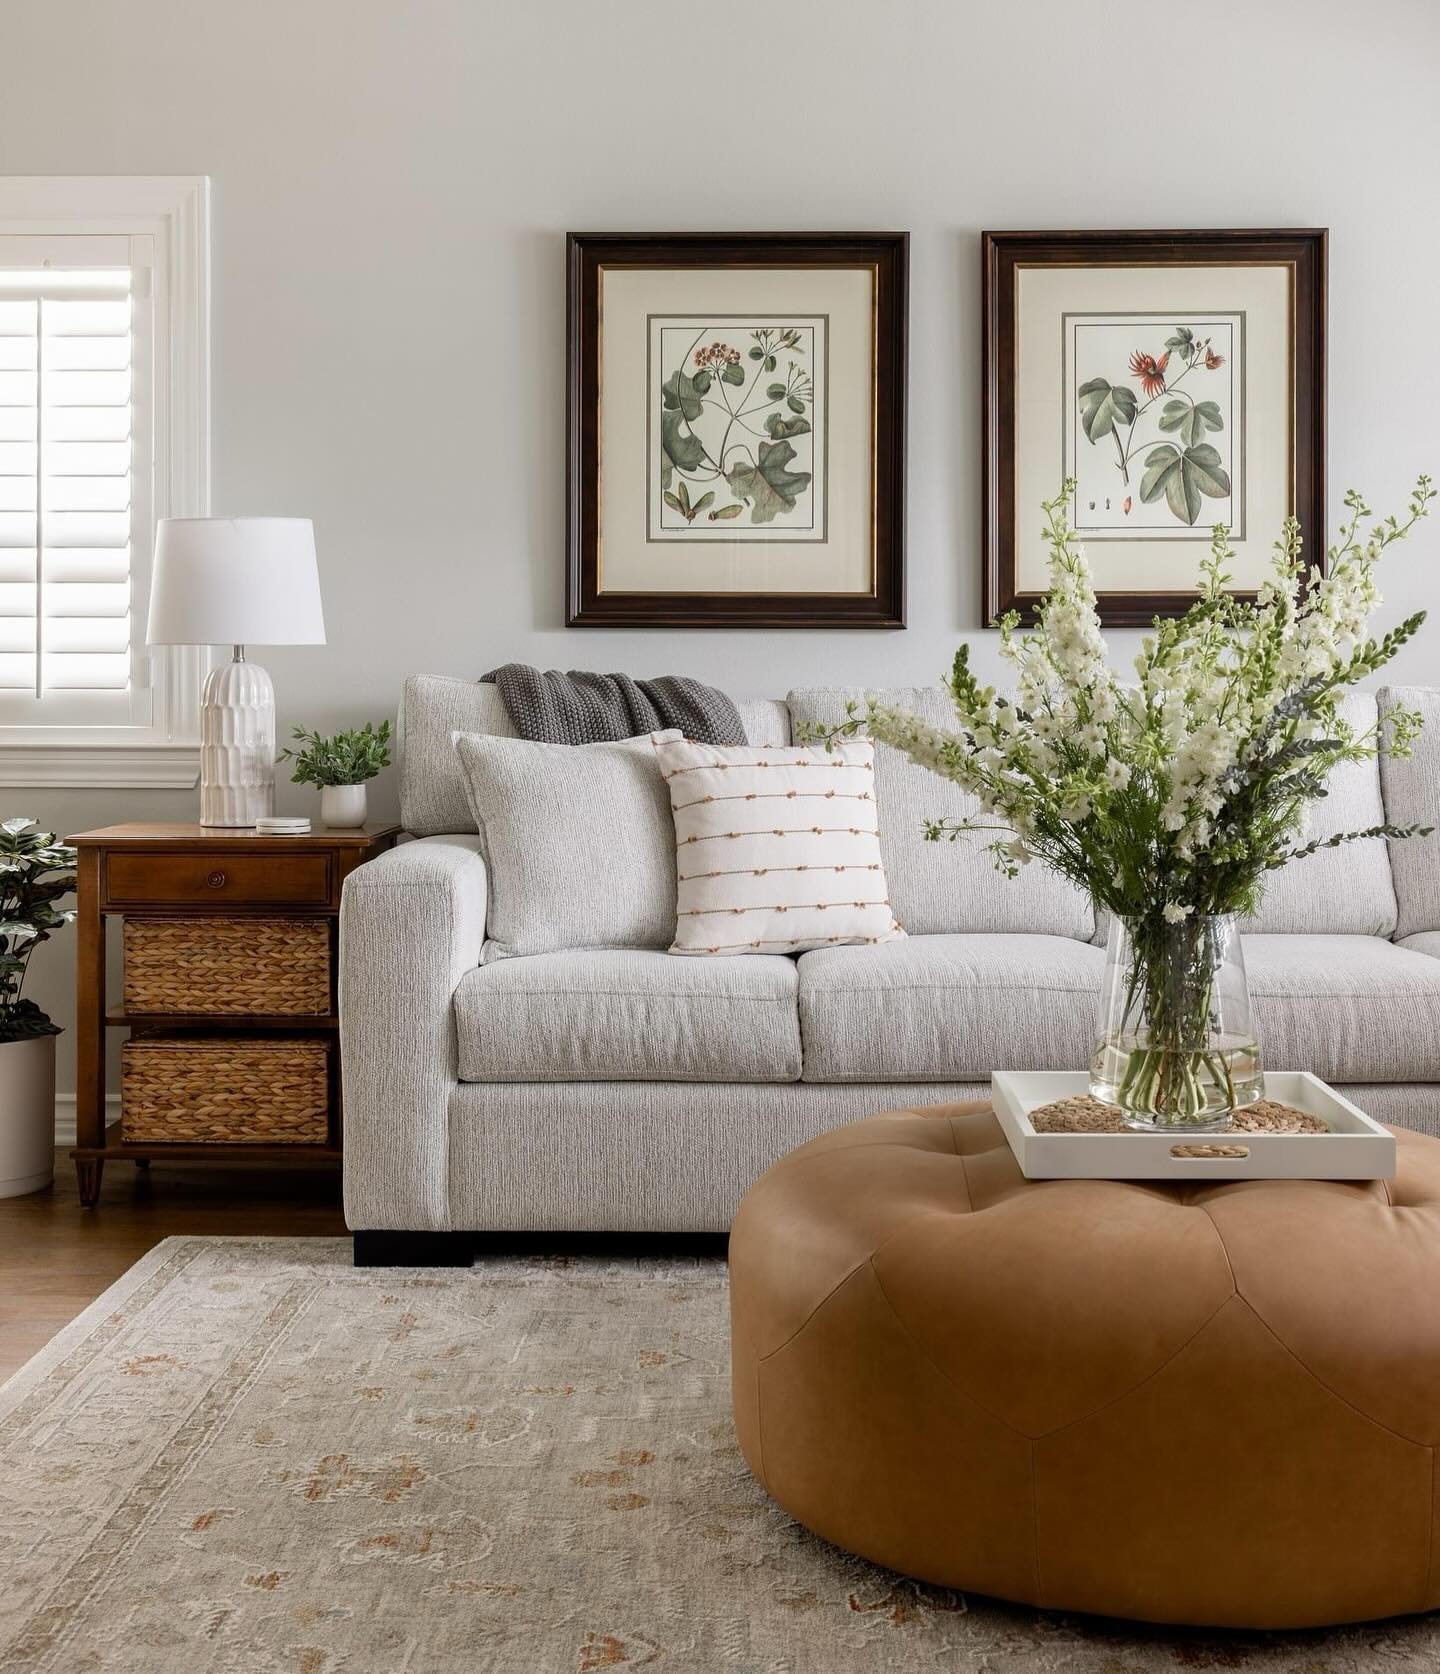 Designing a living room that is both inviting and cohesive for a couple involves thoughtful consideration of color schemes, furniture choices, and personalized touches. 

On this project the homeowner really liked her existing artwork and some key fu